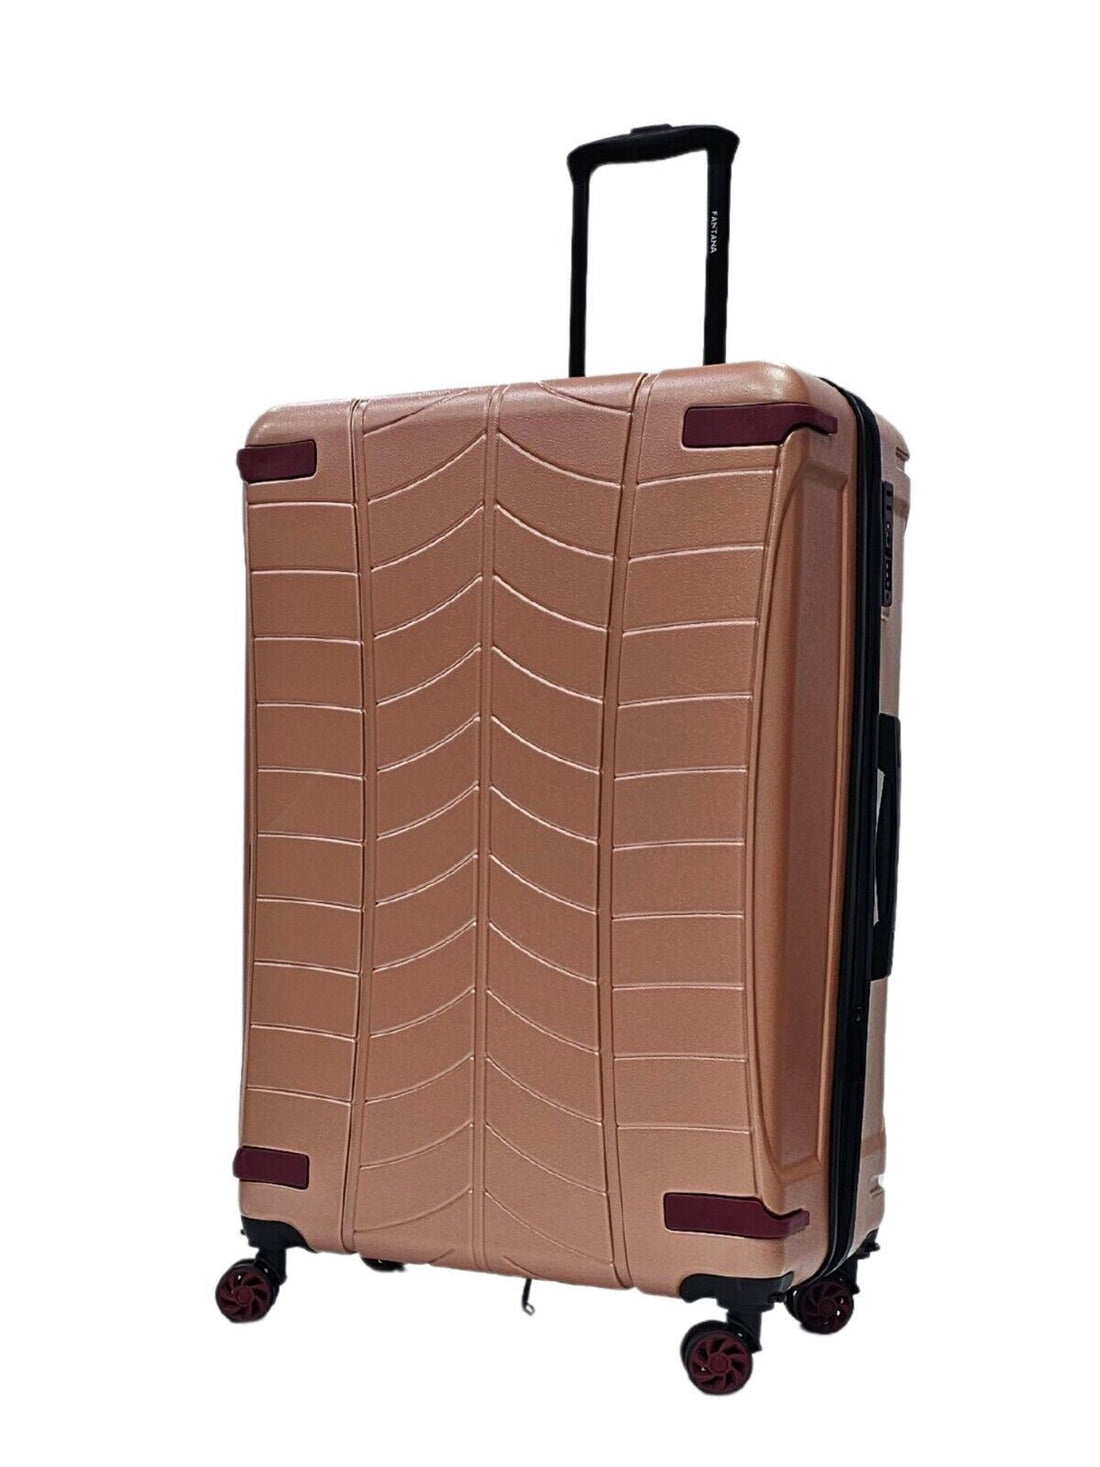 Hard Shell Rose Gold Cabin Suitcase Set 4 Wheel Luggage Travel Bag - Upperclass Fashions 